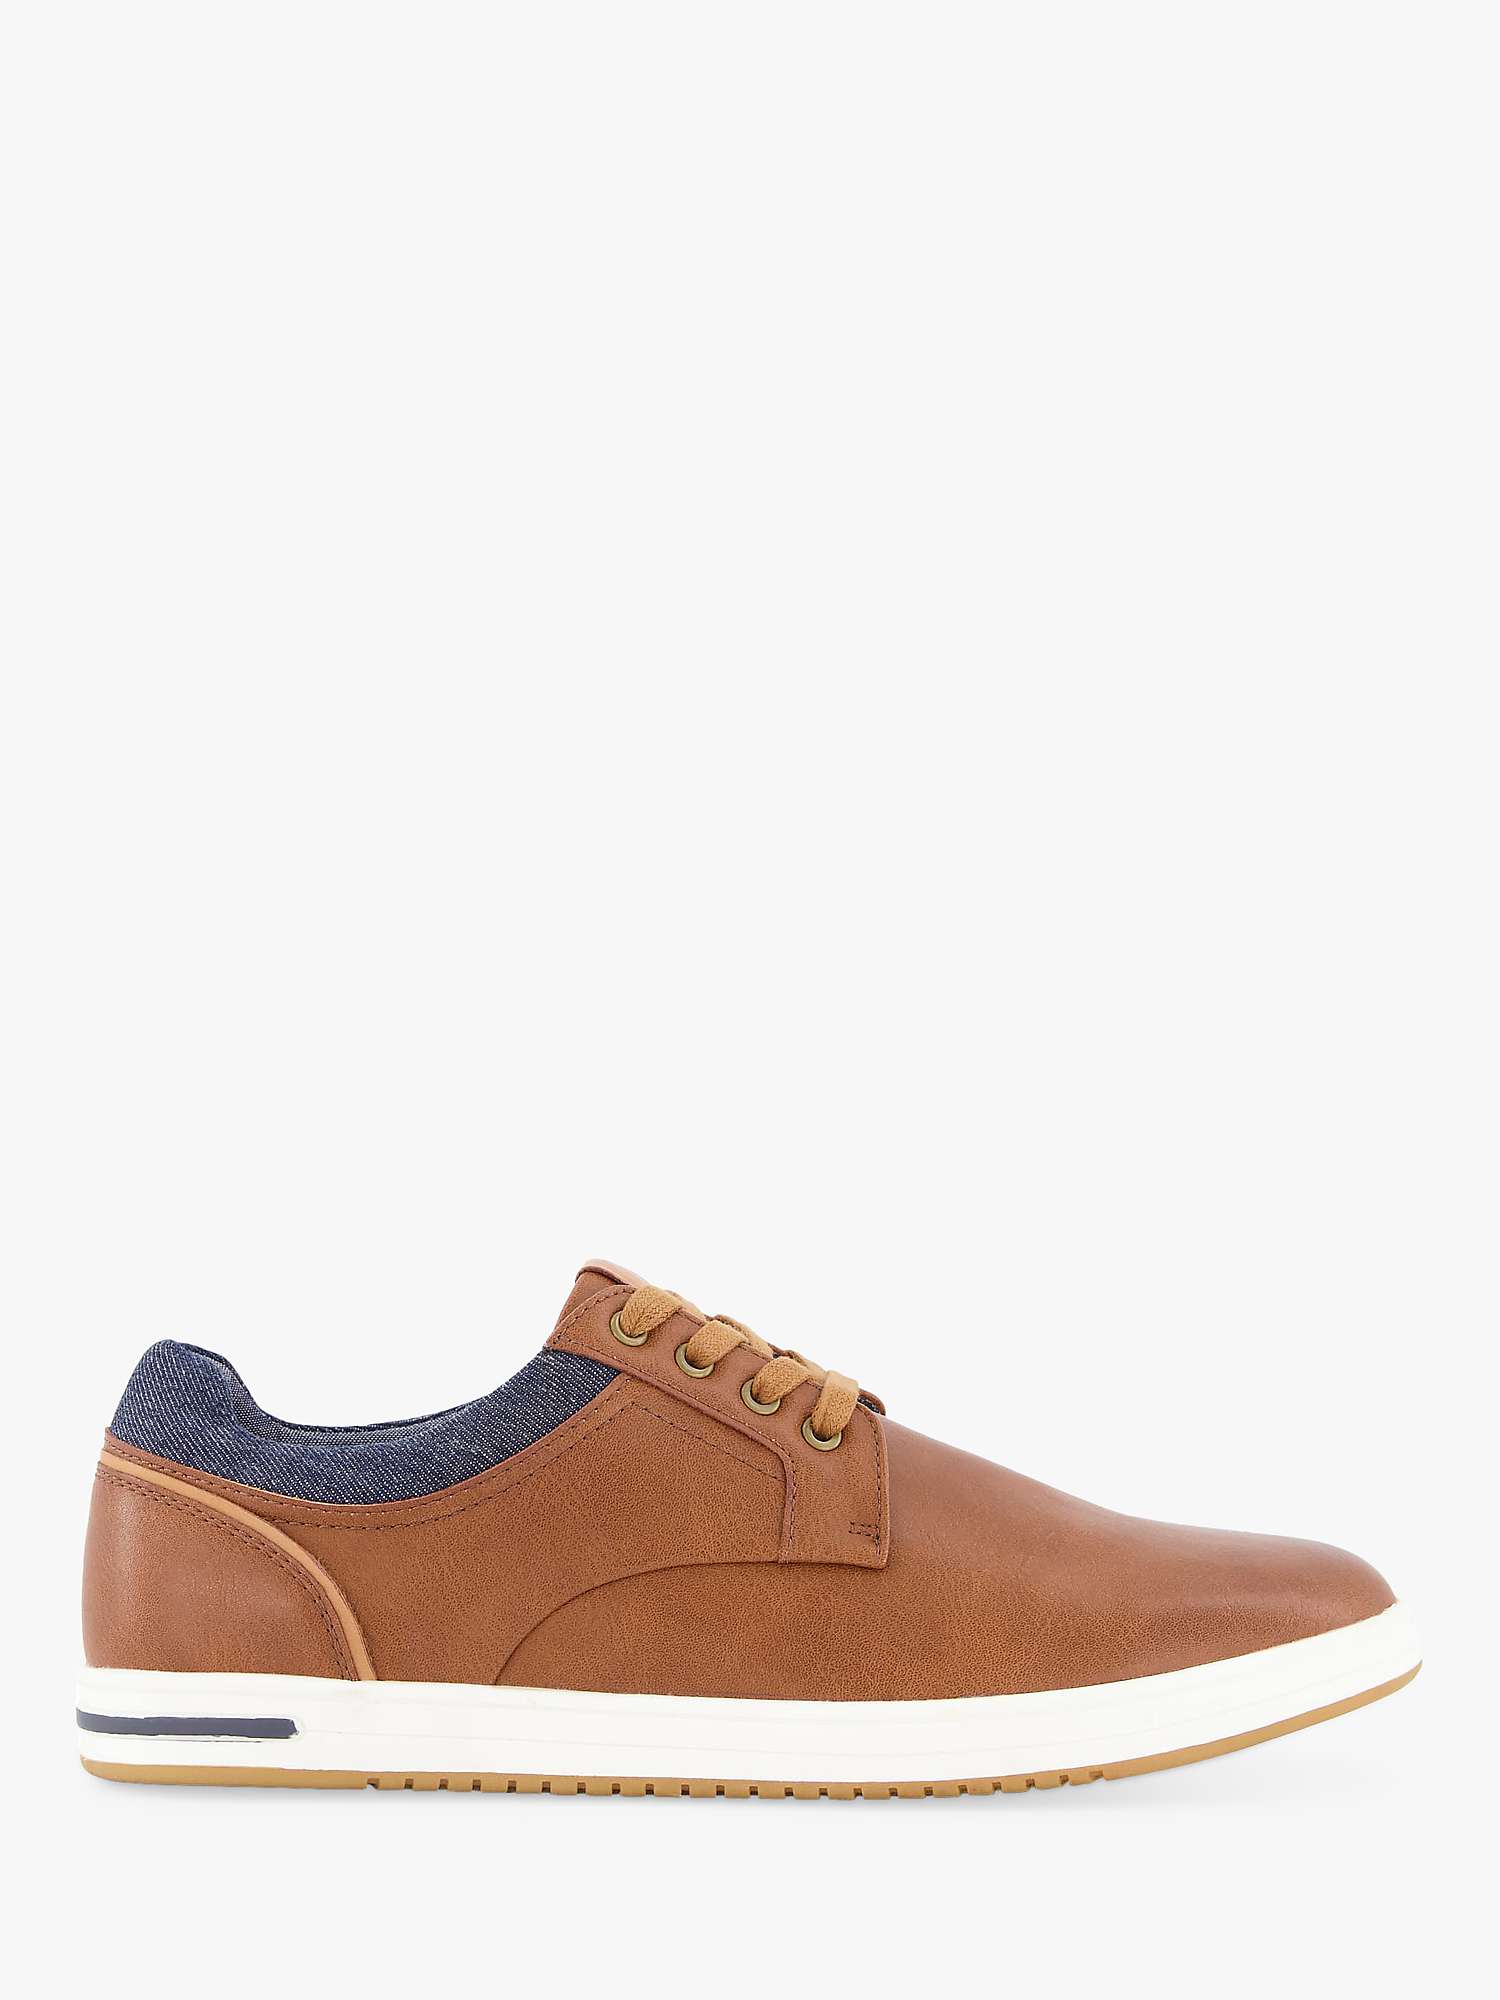 Buy Dune Trip Textured Trainers, Tan Online at johnlewis.com